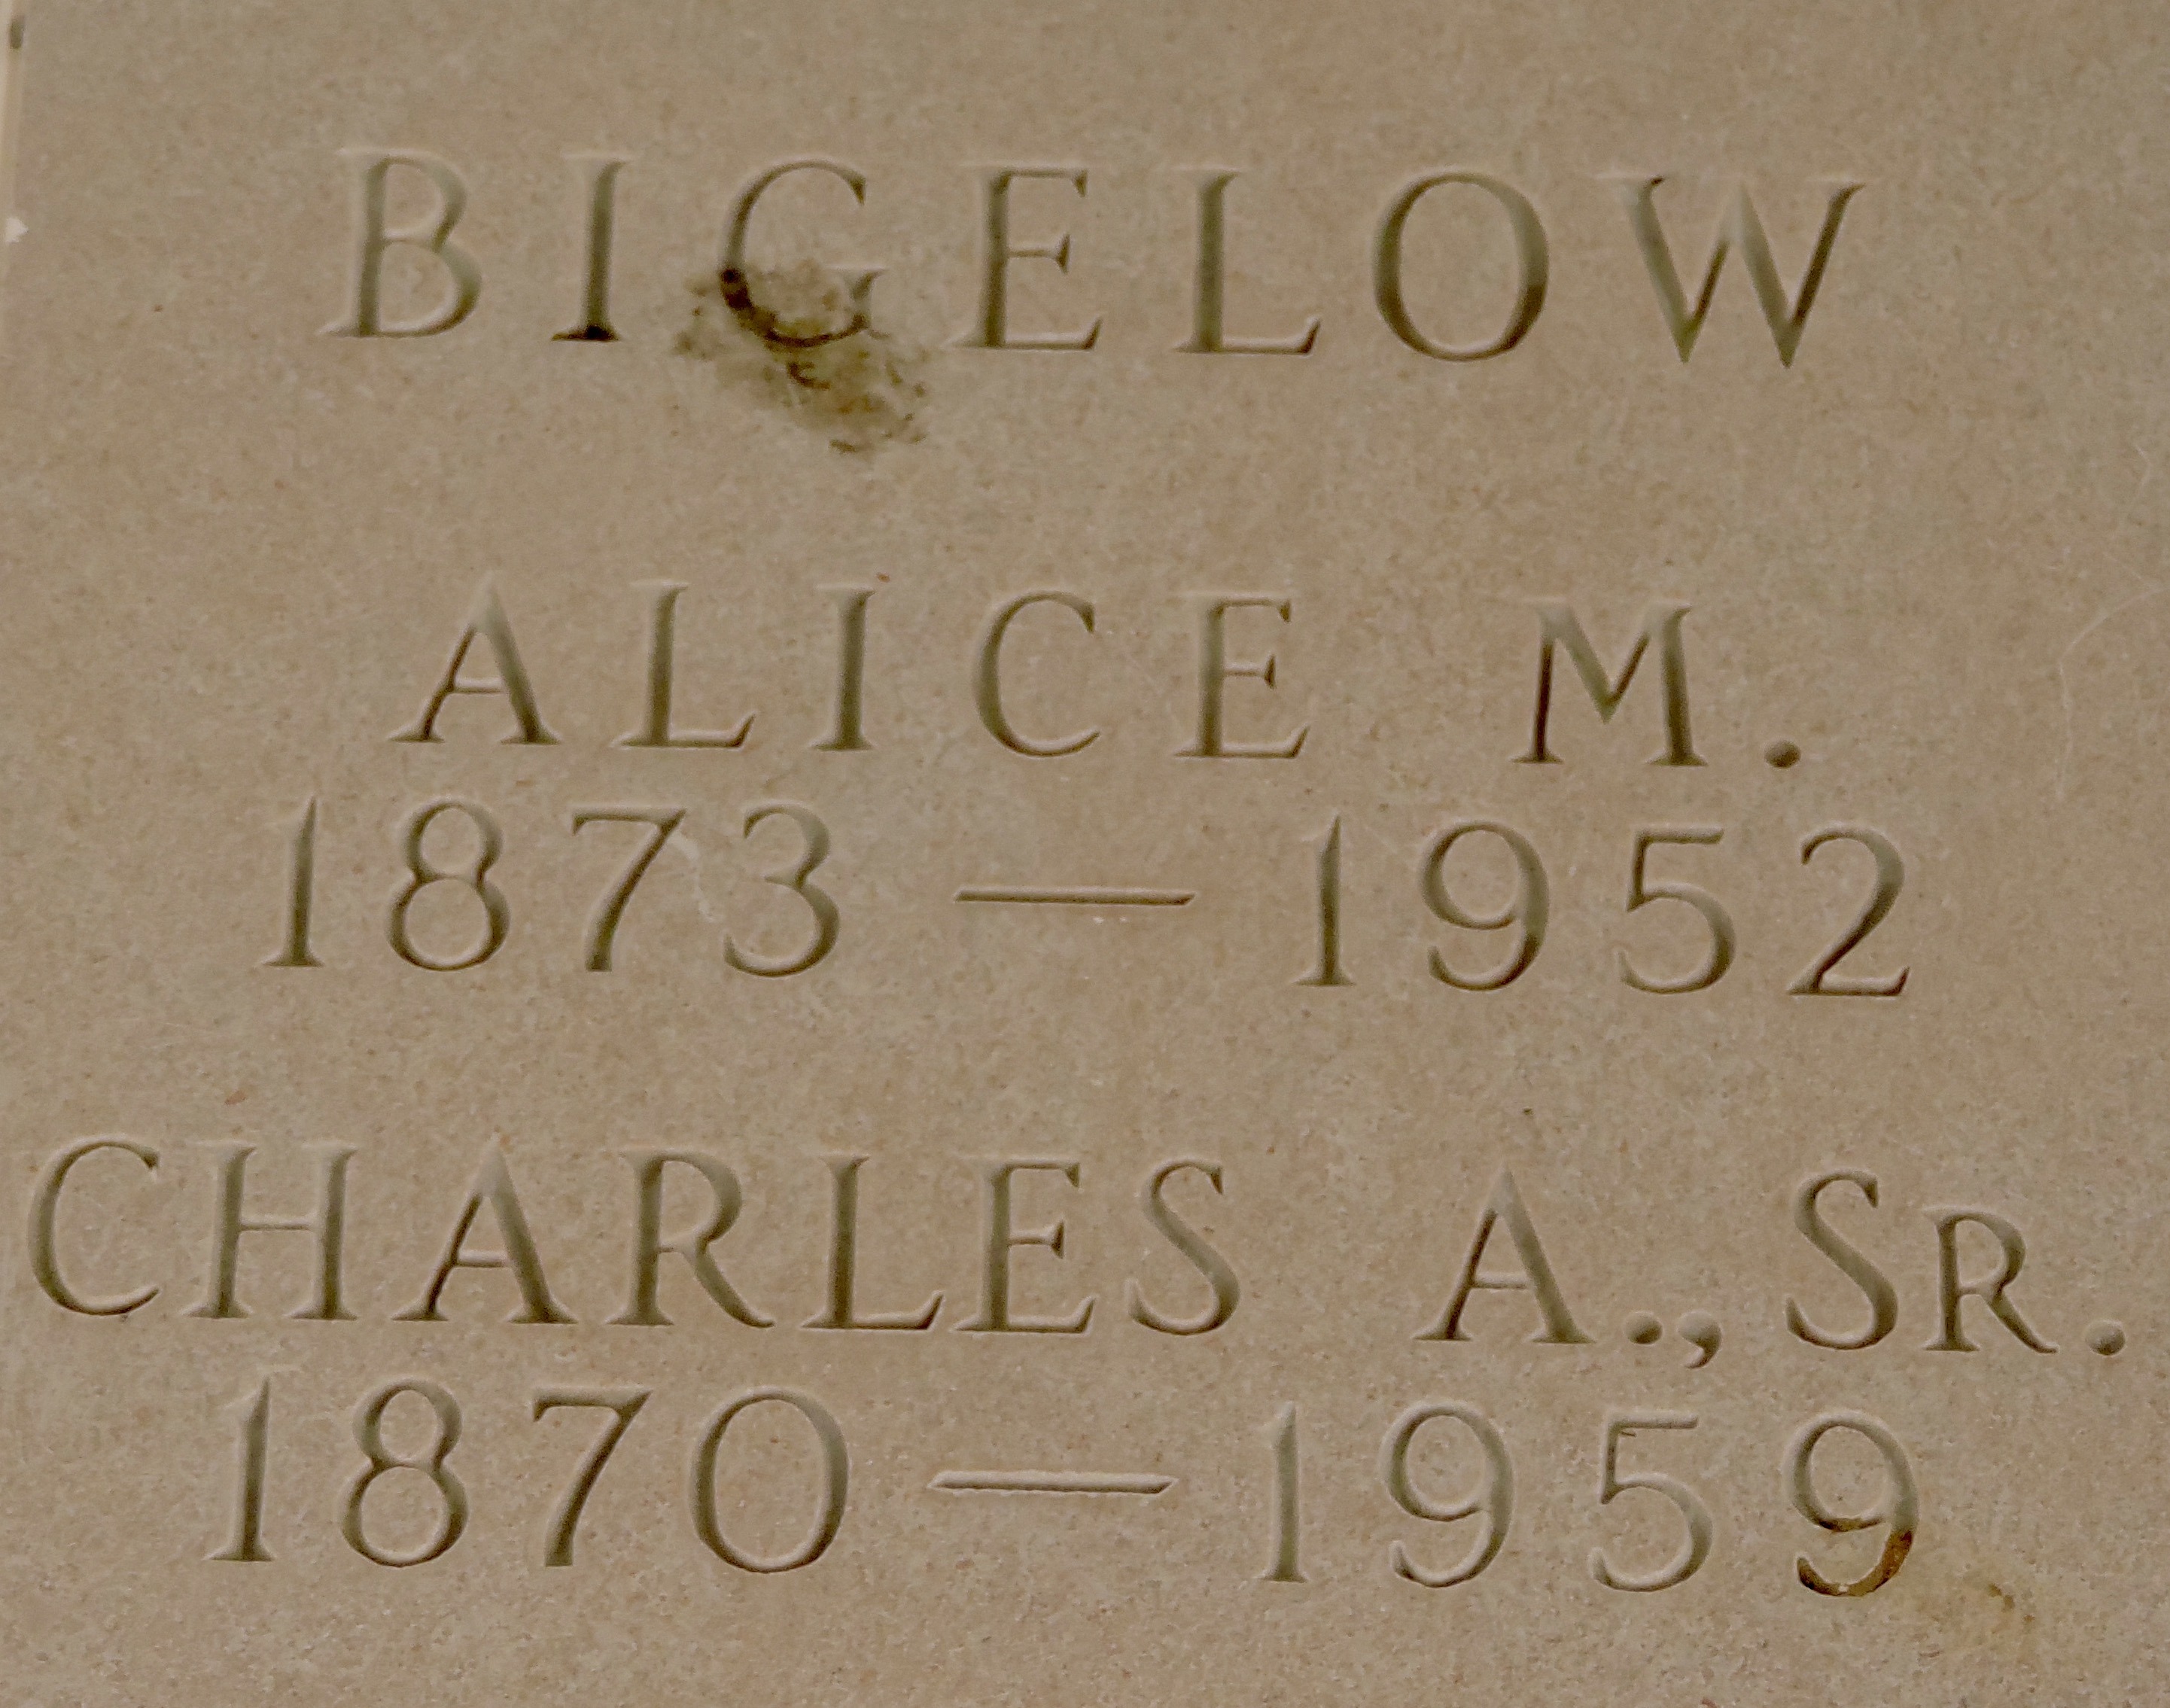 Charles and Alice